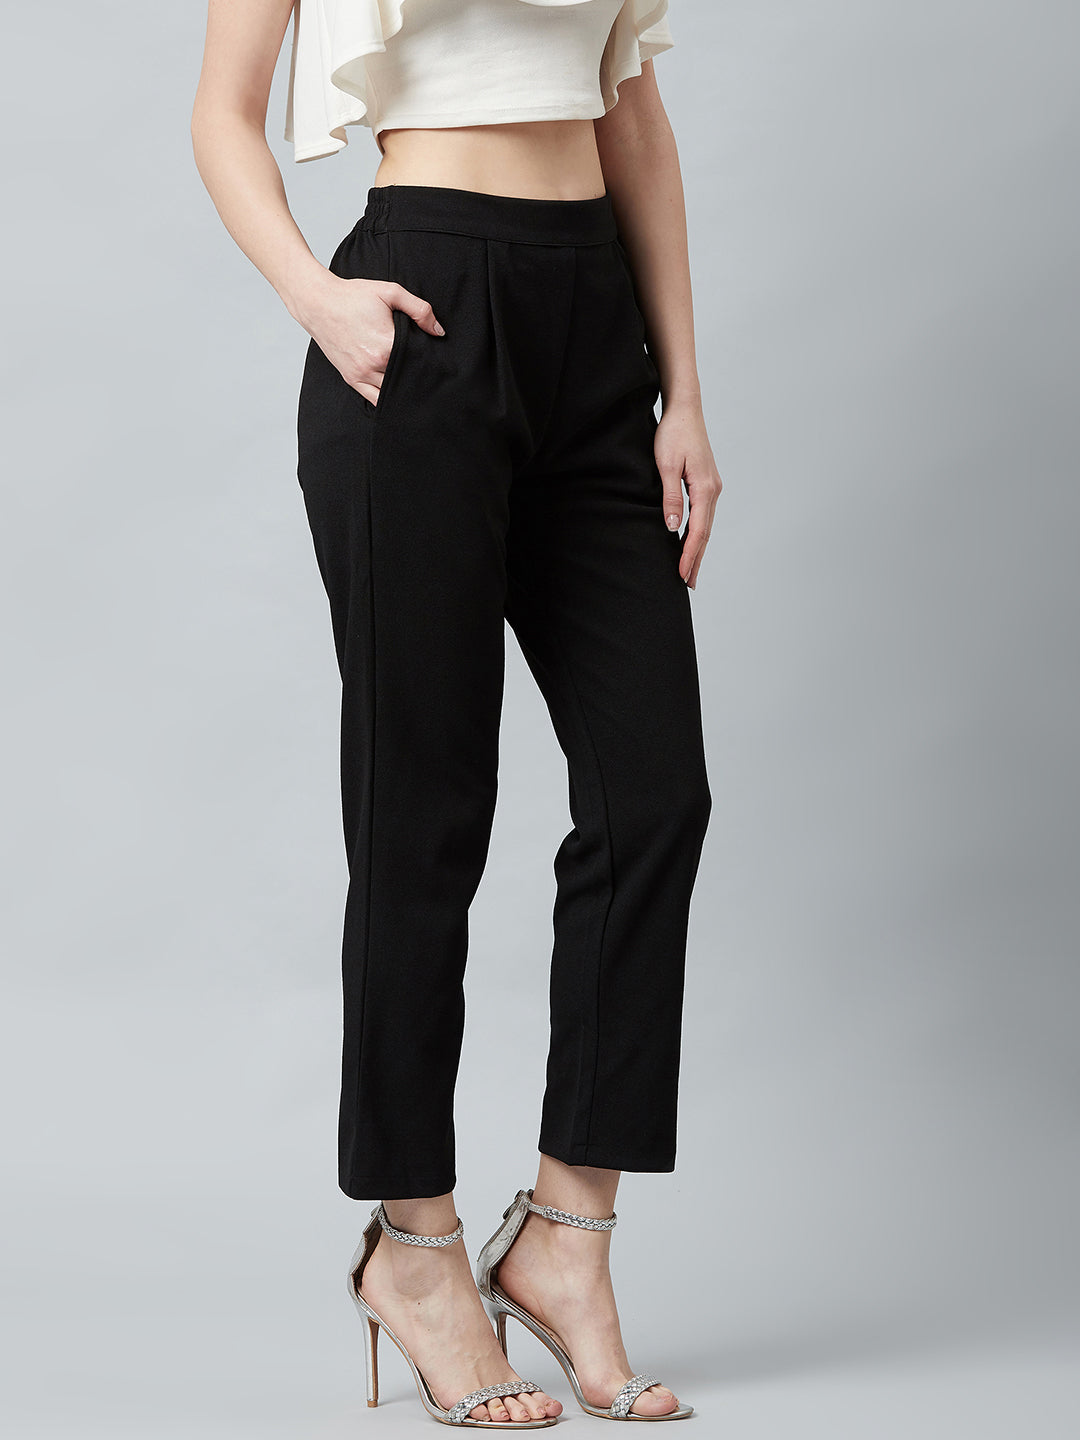 Ask4Fashion Slim Fit Women Black Trousers  Buy Ask4Fashion Slim Fit Women  Black Trousers Online at Best Prices in India  Flipkartcom